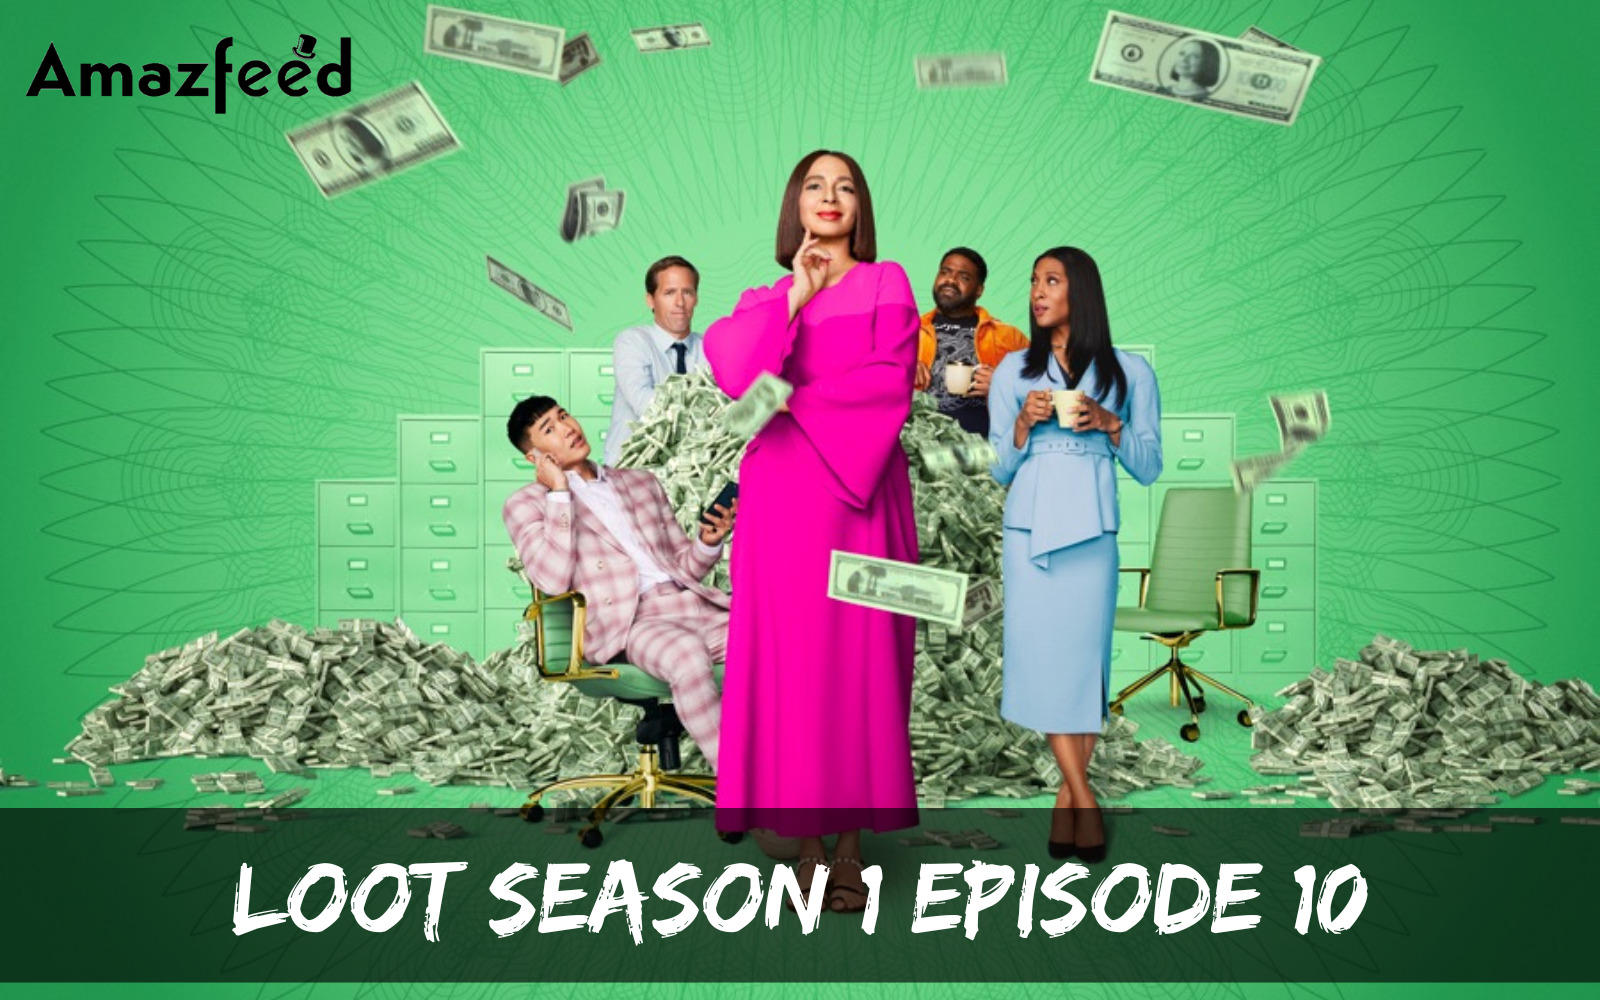 What Is the Review of the Loot season 1 episode 10